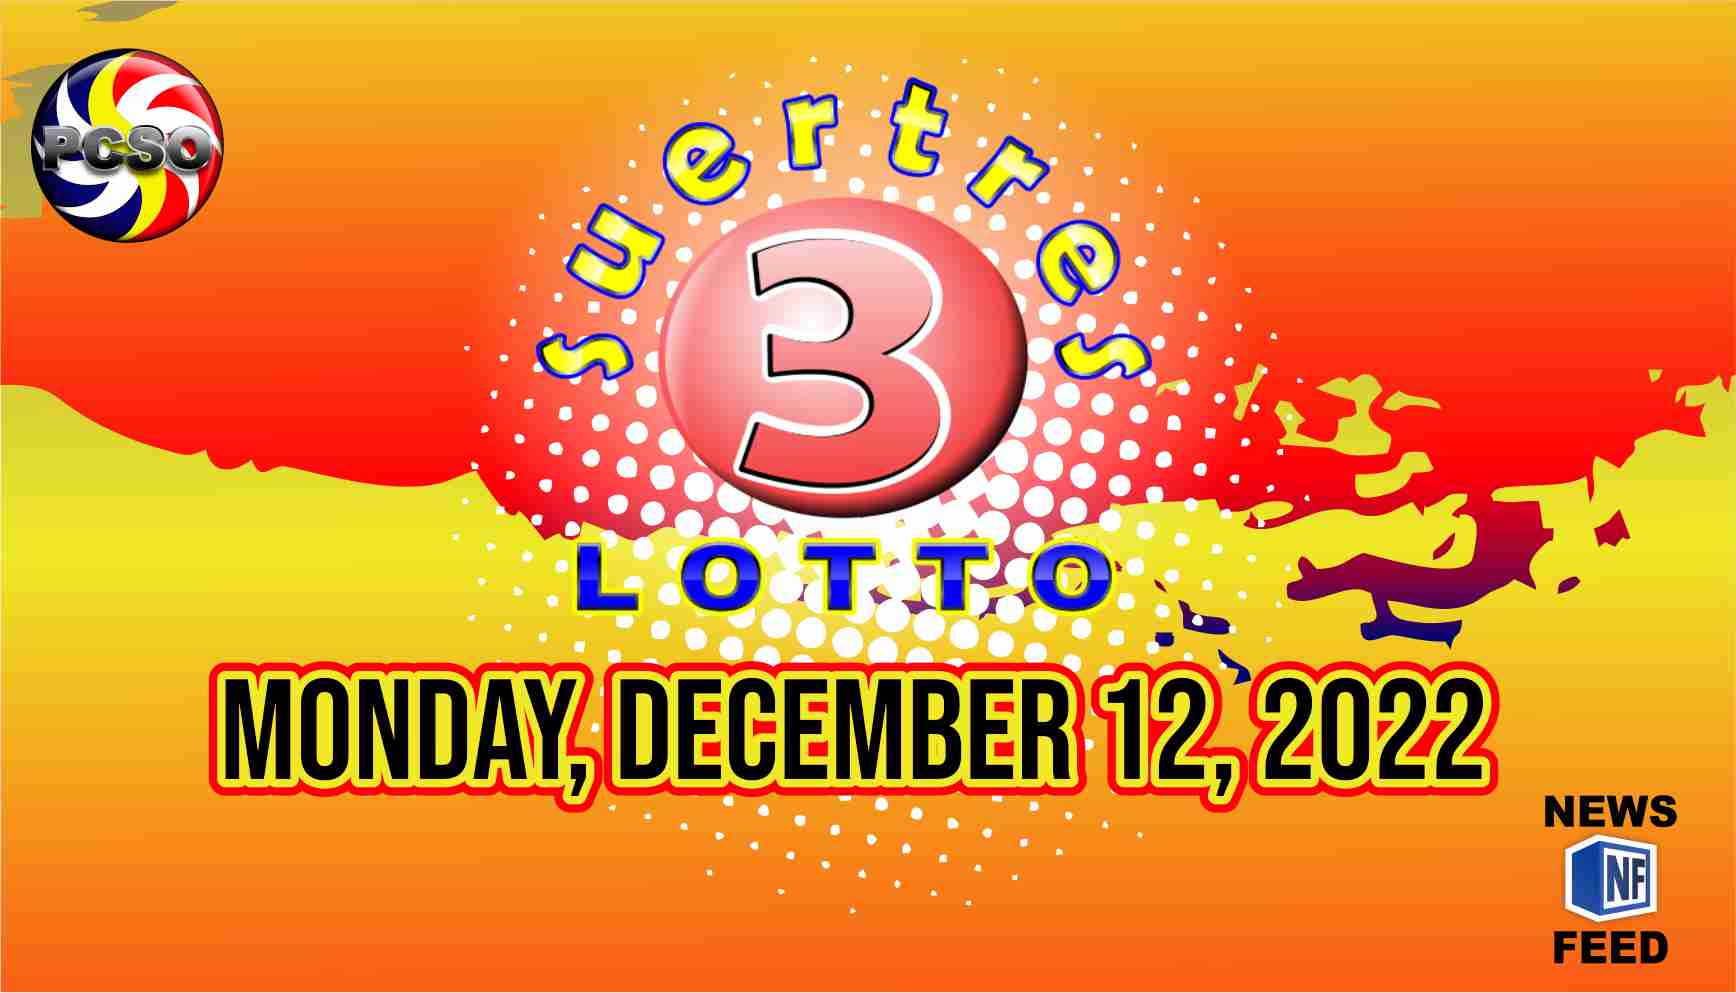 SWERTRES RESULT, Monday, December 12, 2022 Official PCSO Lotto Results